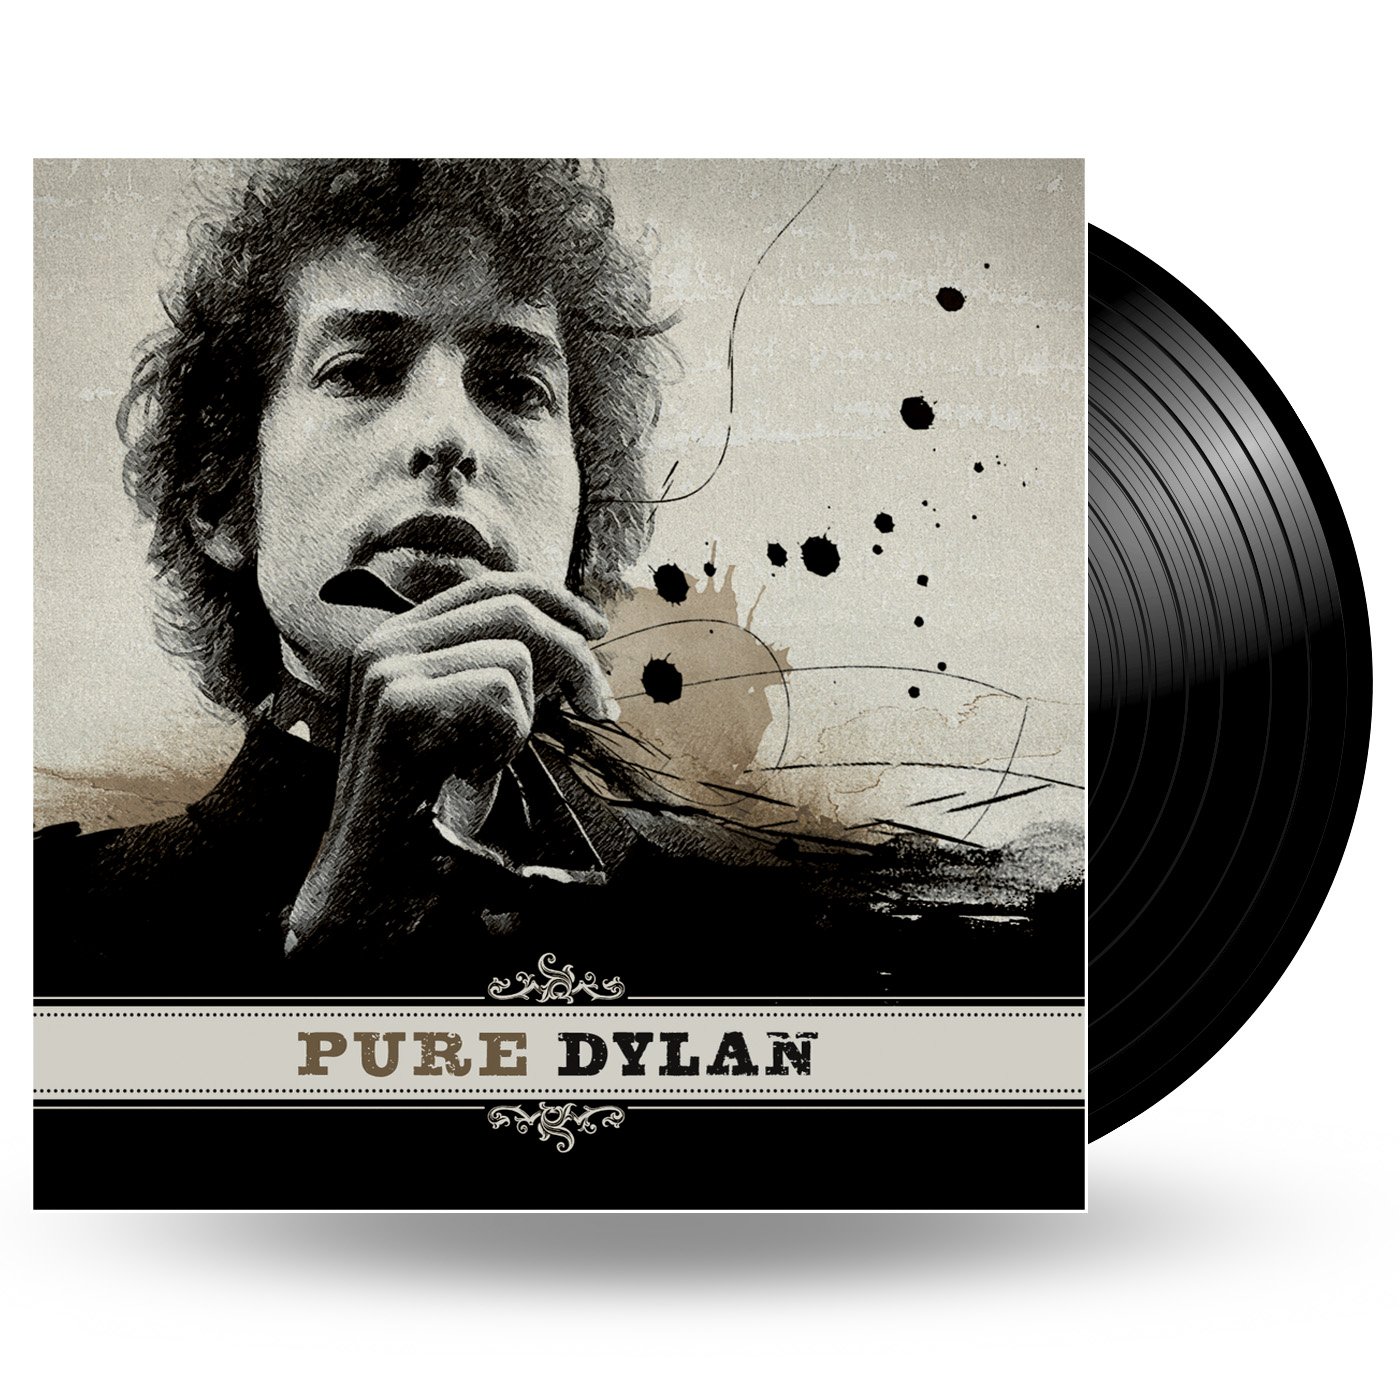 Pure Dylan – An Intimate Look At Bob Dylan (Vinyl)